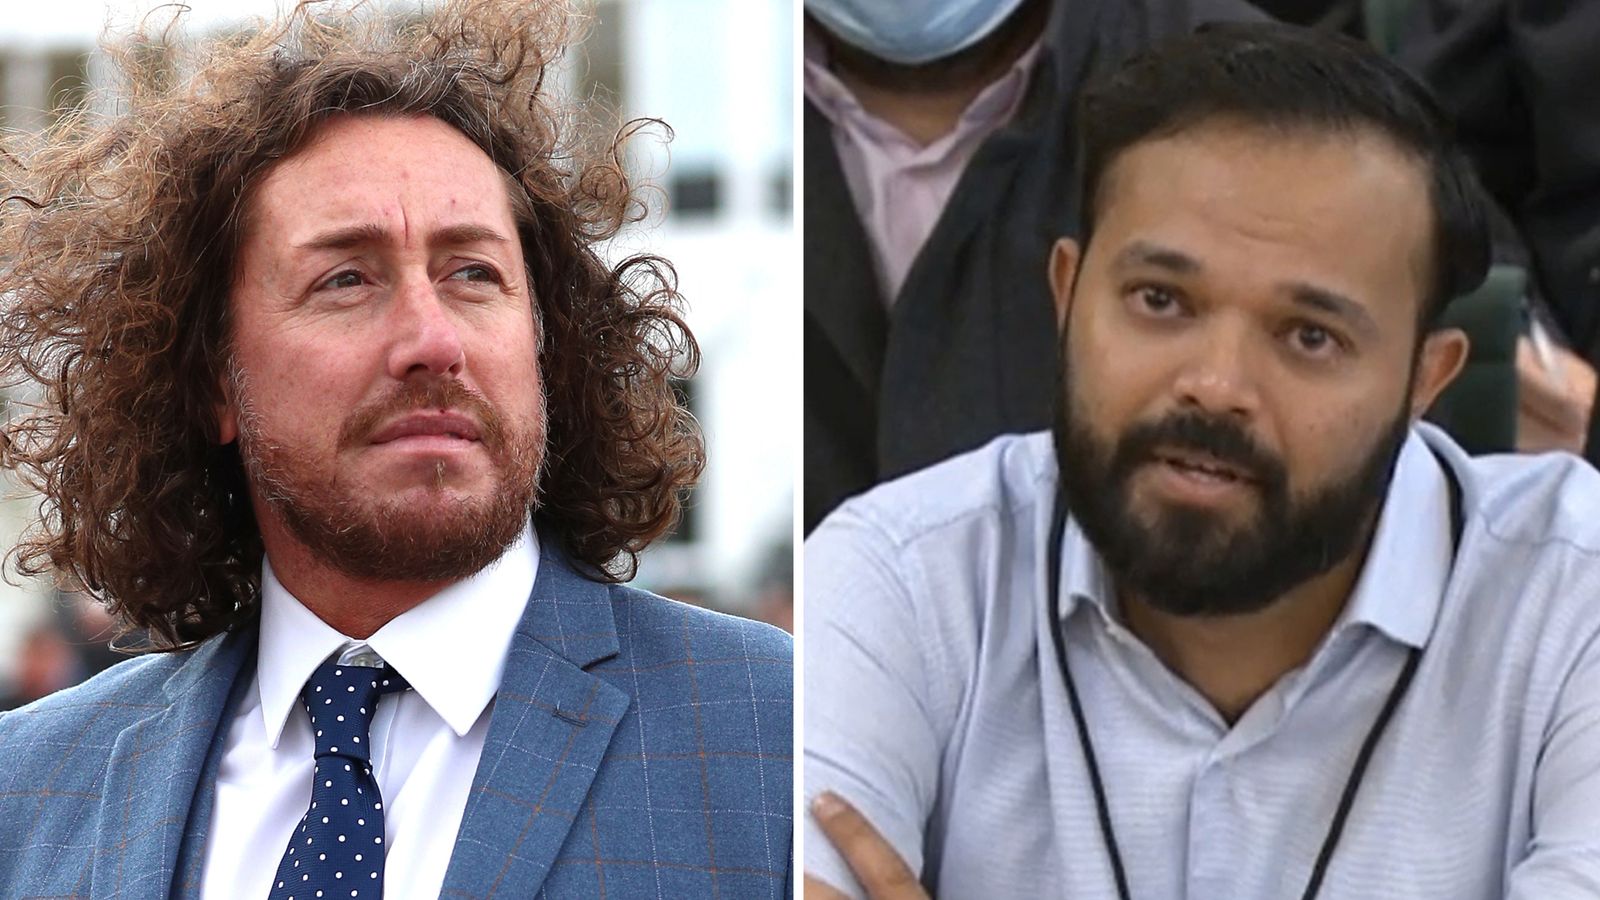 Ryan Sidebottom: Yorkshire cricket coach apologises for ‘poor choice of words’ over racism scandal after Azeem Rafiq responds